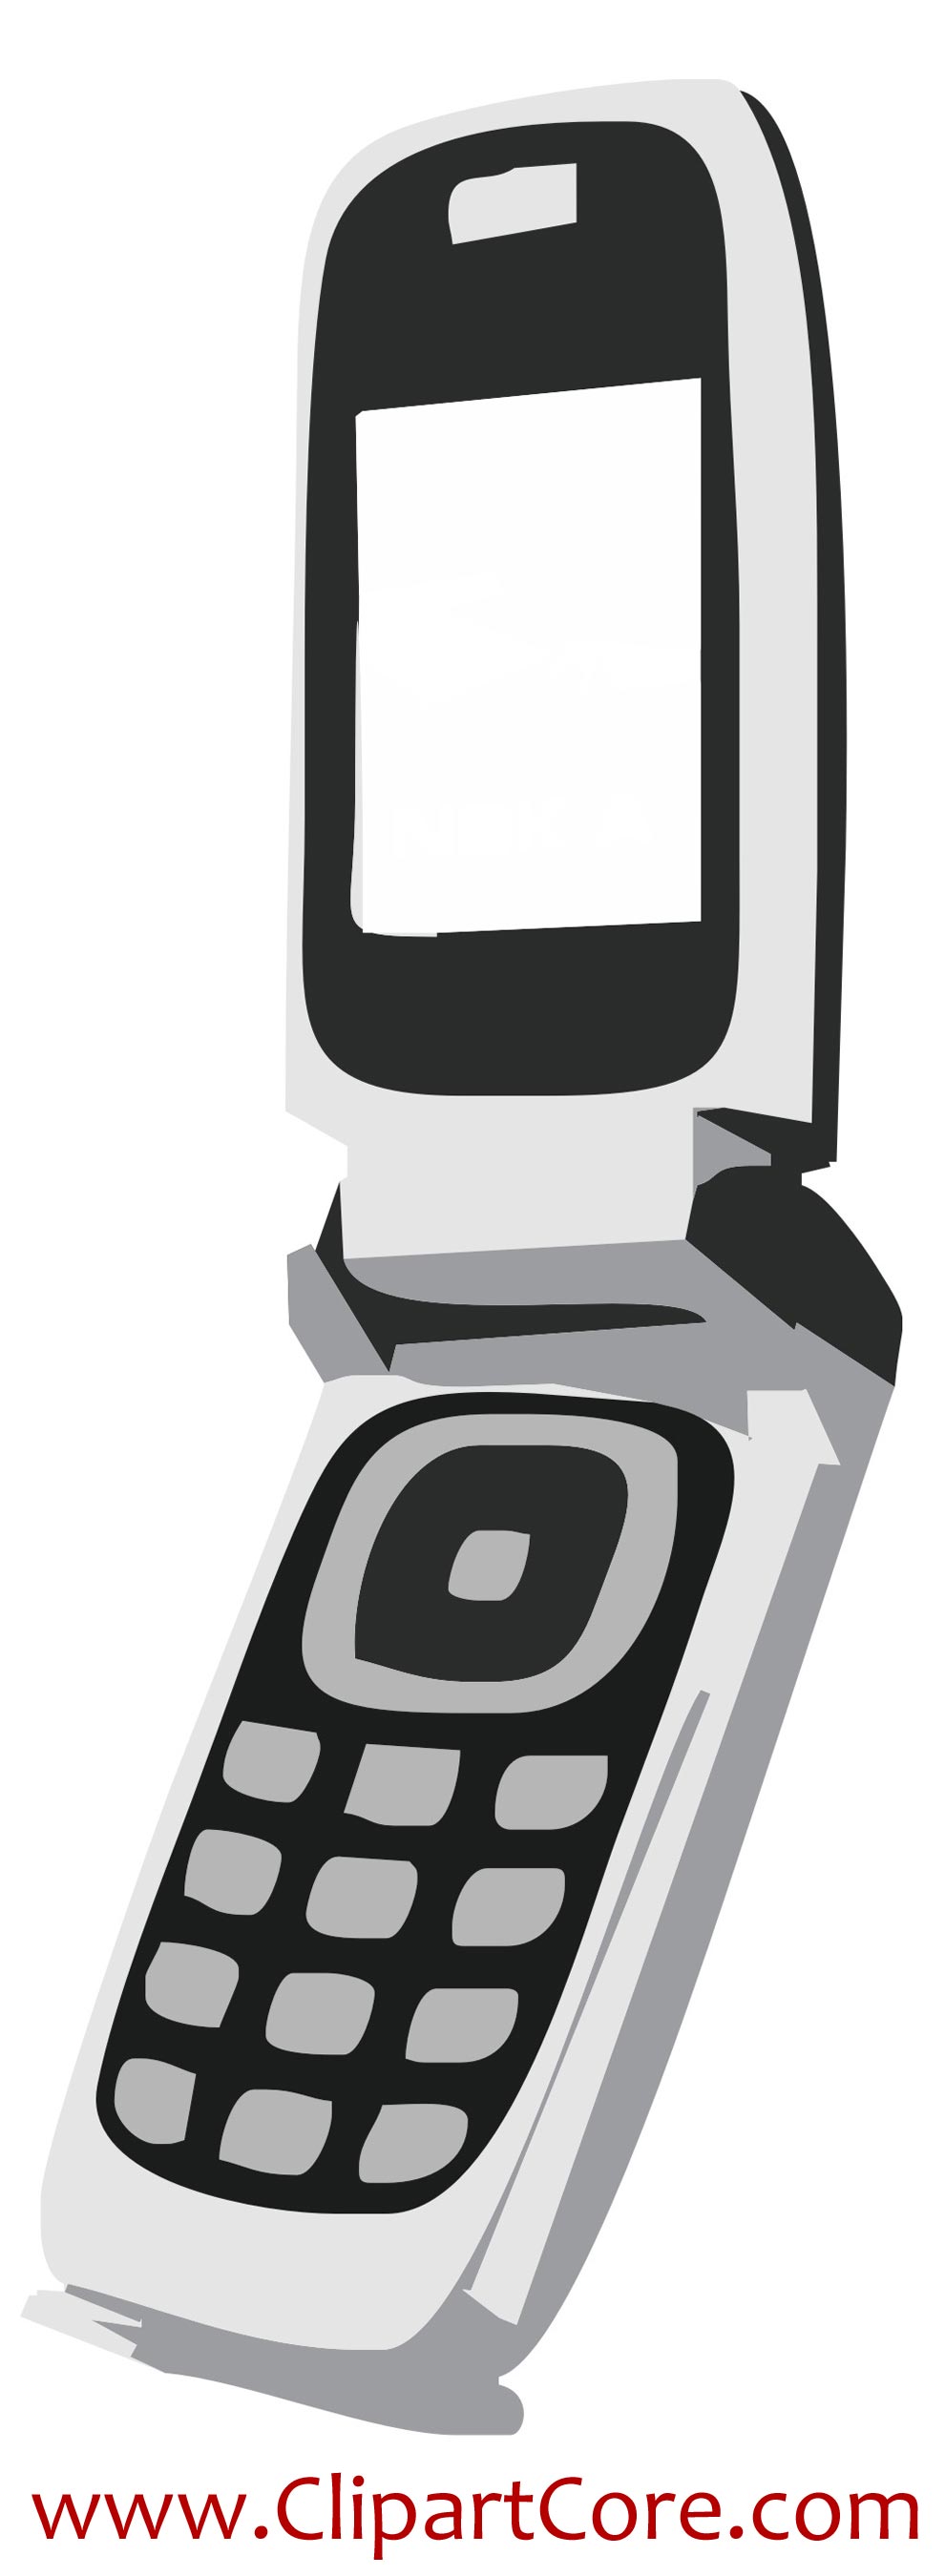 clipart cell phone - photo #42